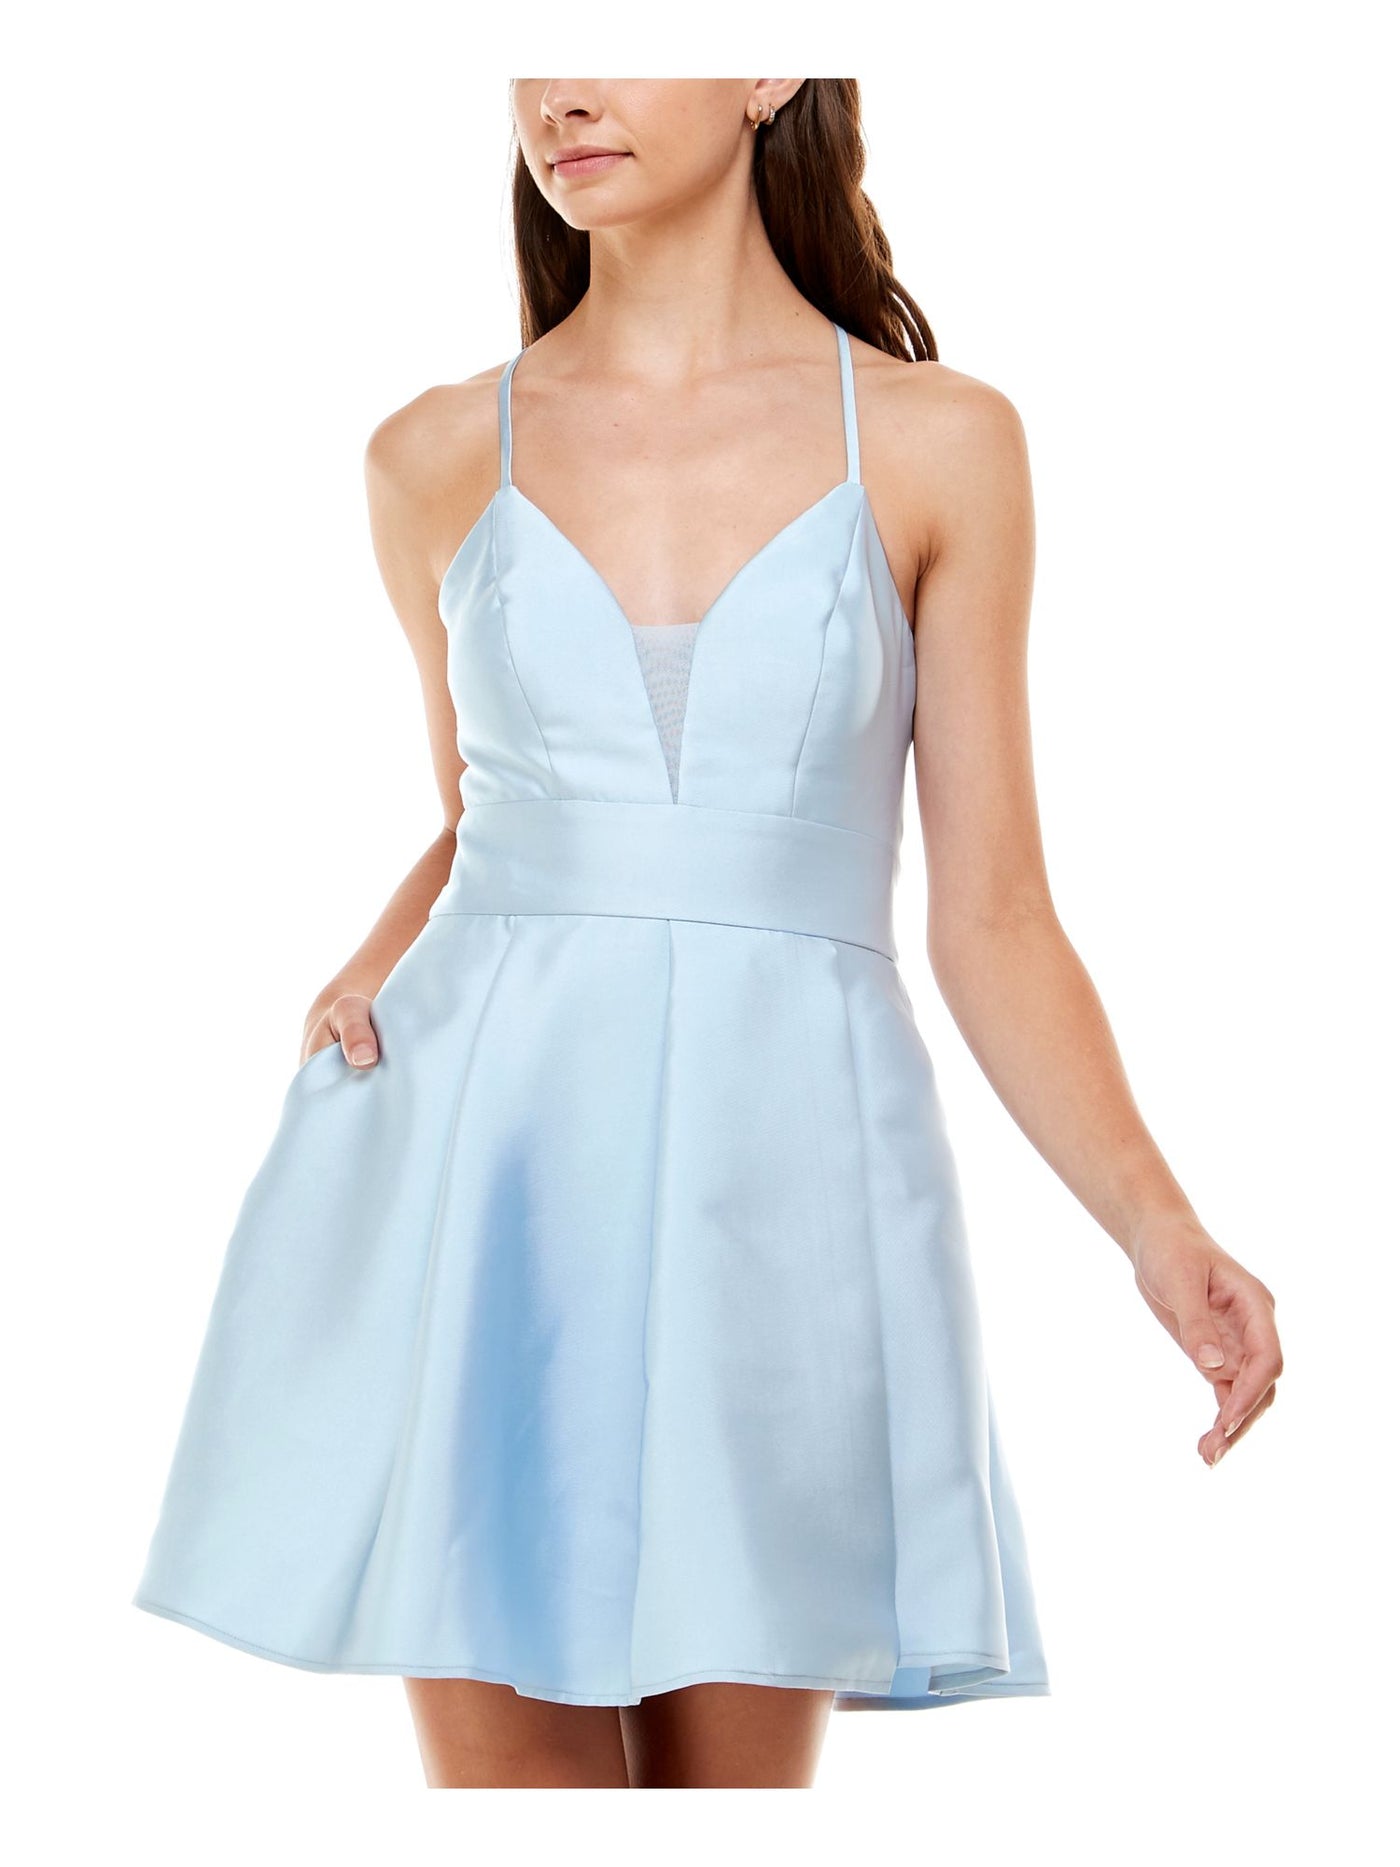 SPEECHLESS Womens Light Blue Pocketed Zippered Cut Out Lace Back Pleated Spaghetti Strap V Neck Short Party Fit + Flare Dress Juniors 9